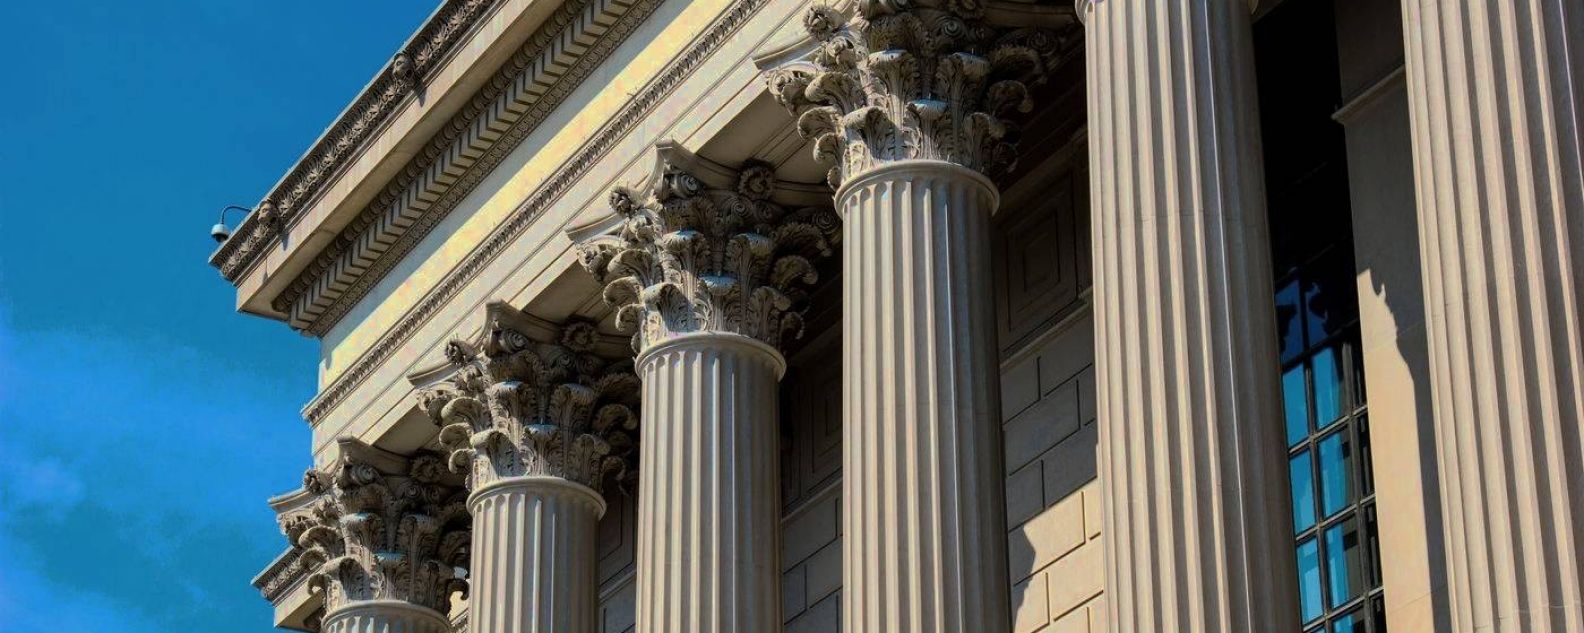 Close-up of building showing tops of corinthian columns